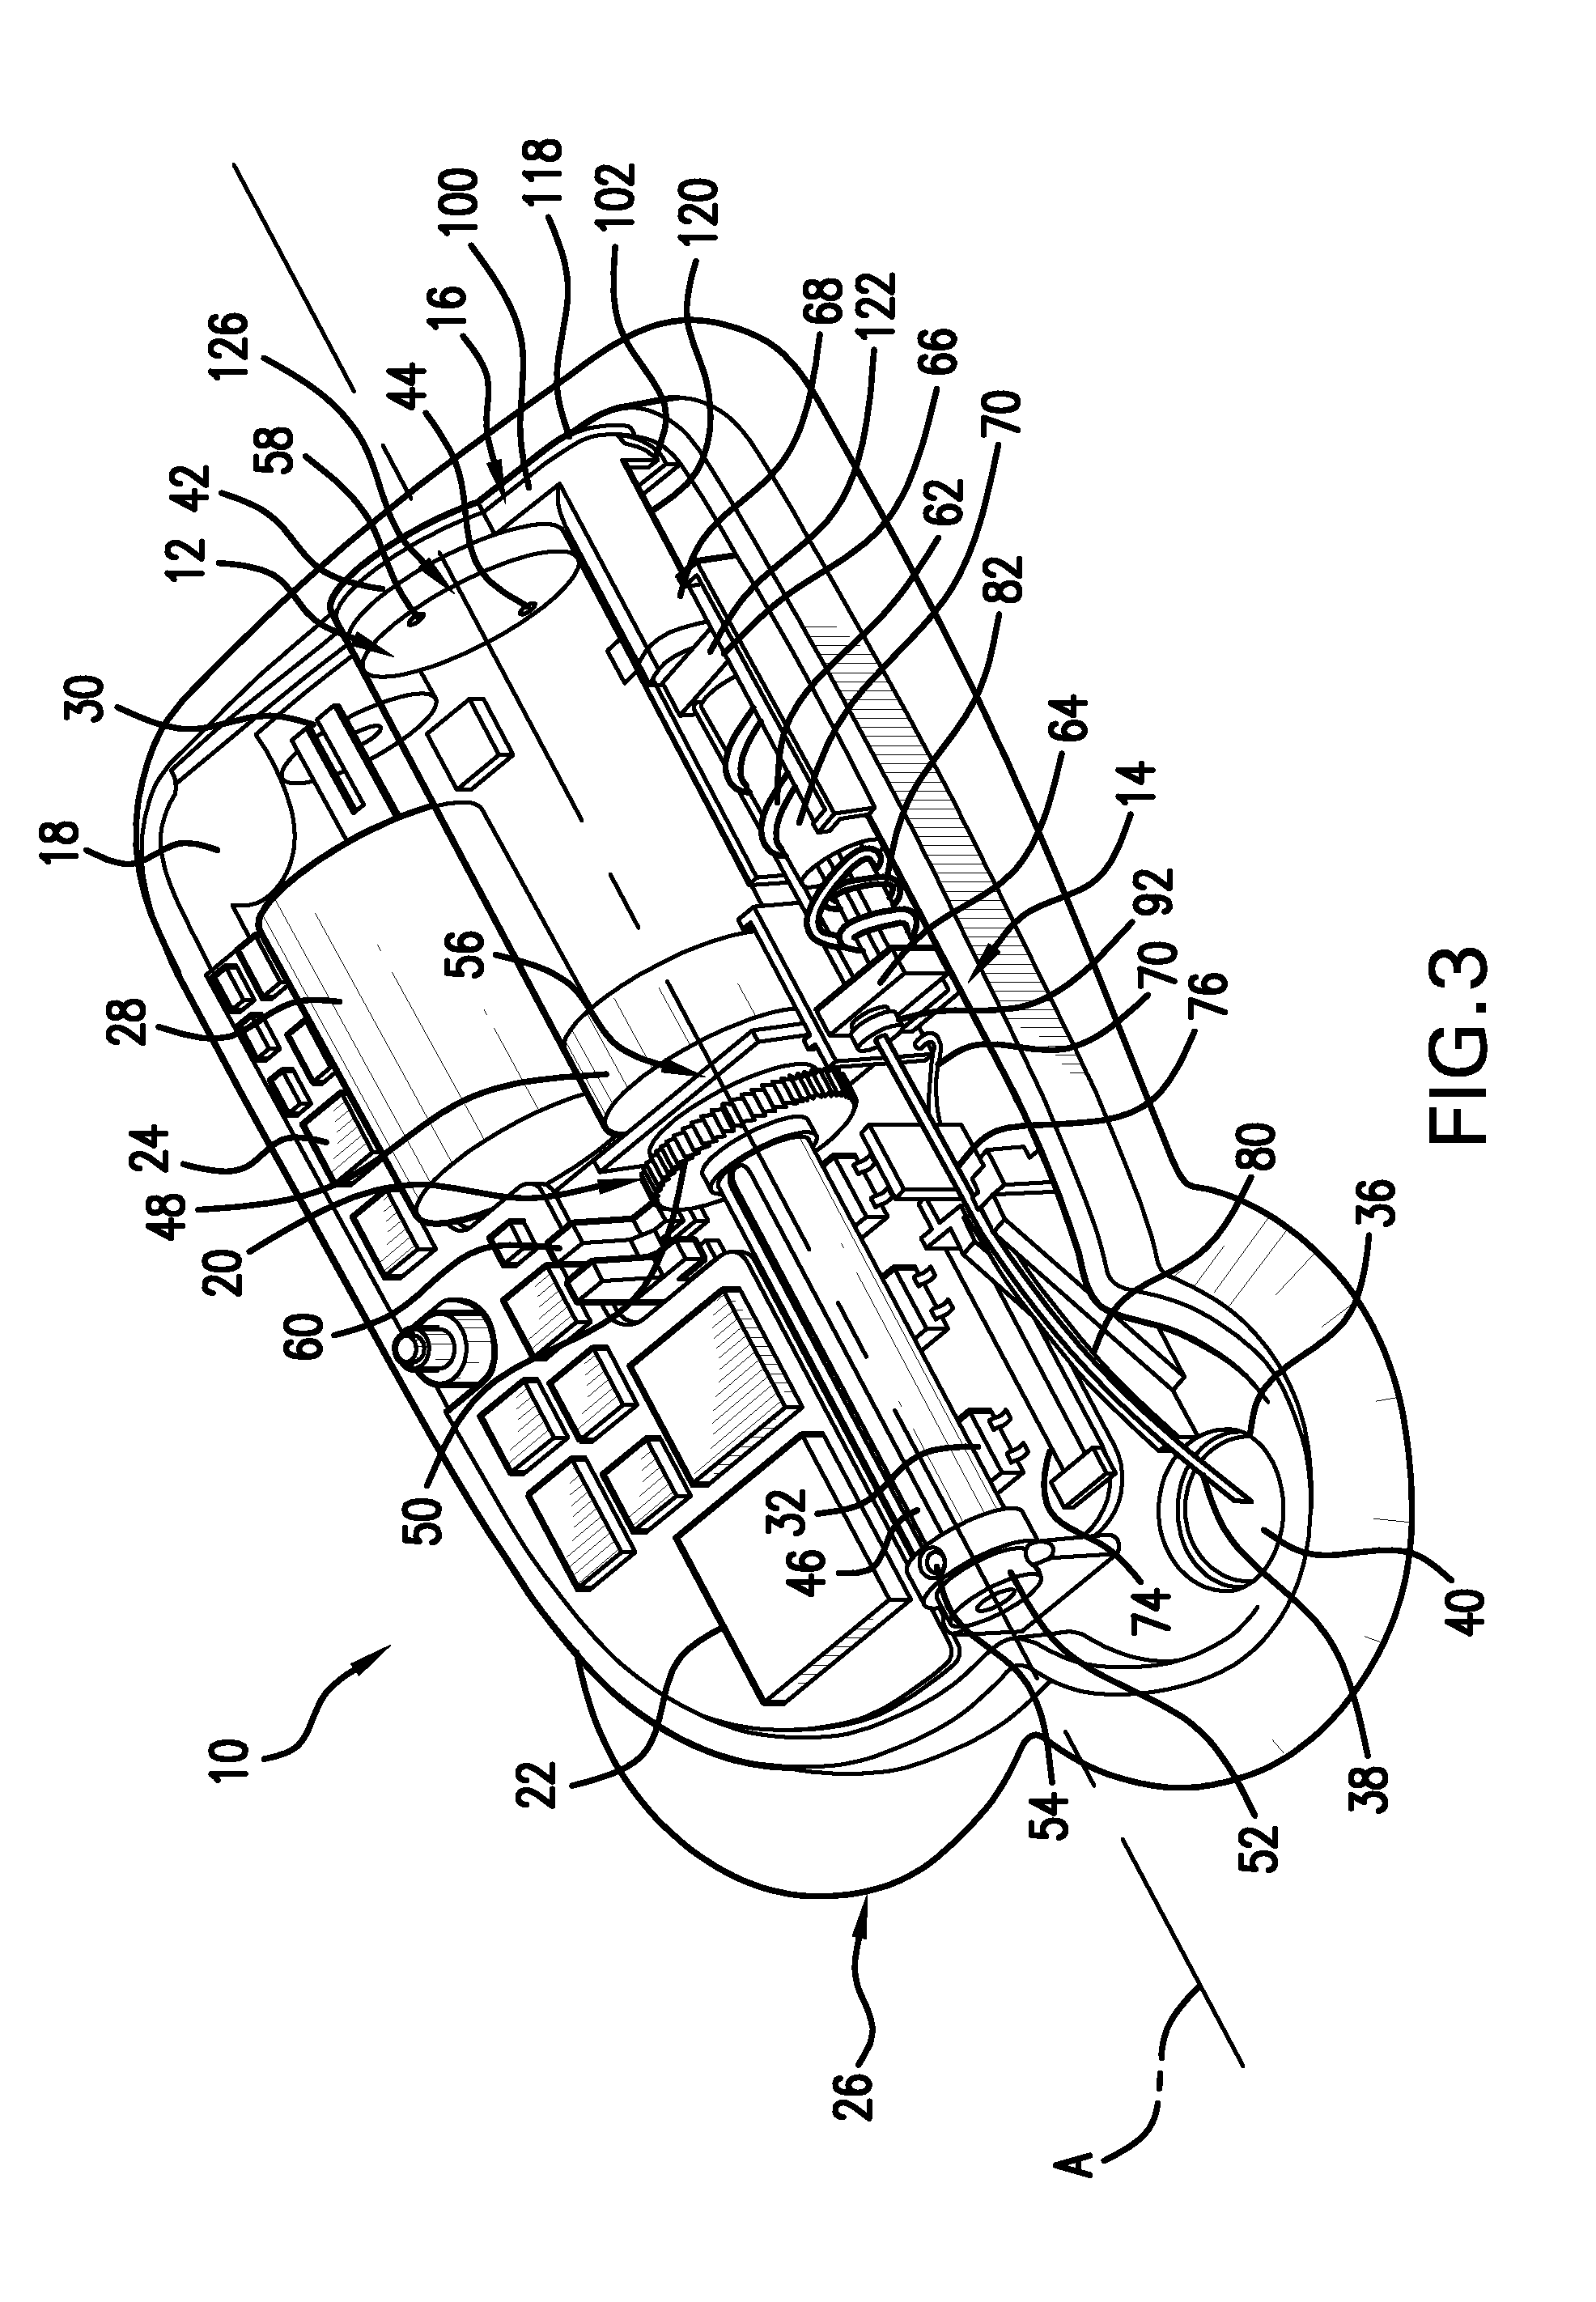 Components and methods for patient infusion device